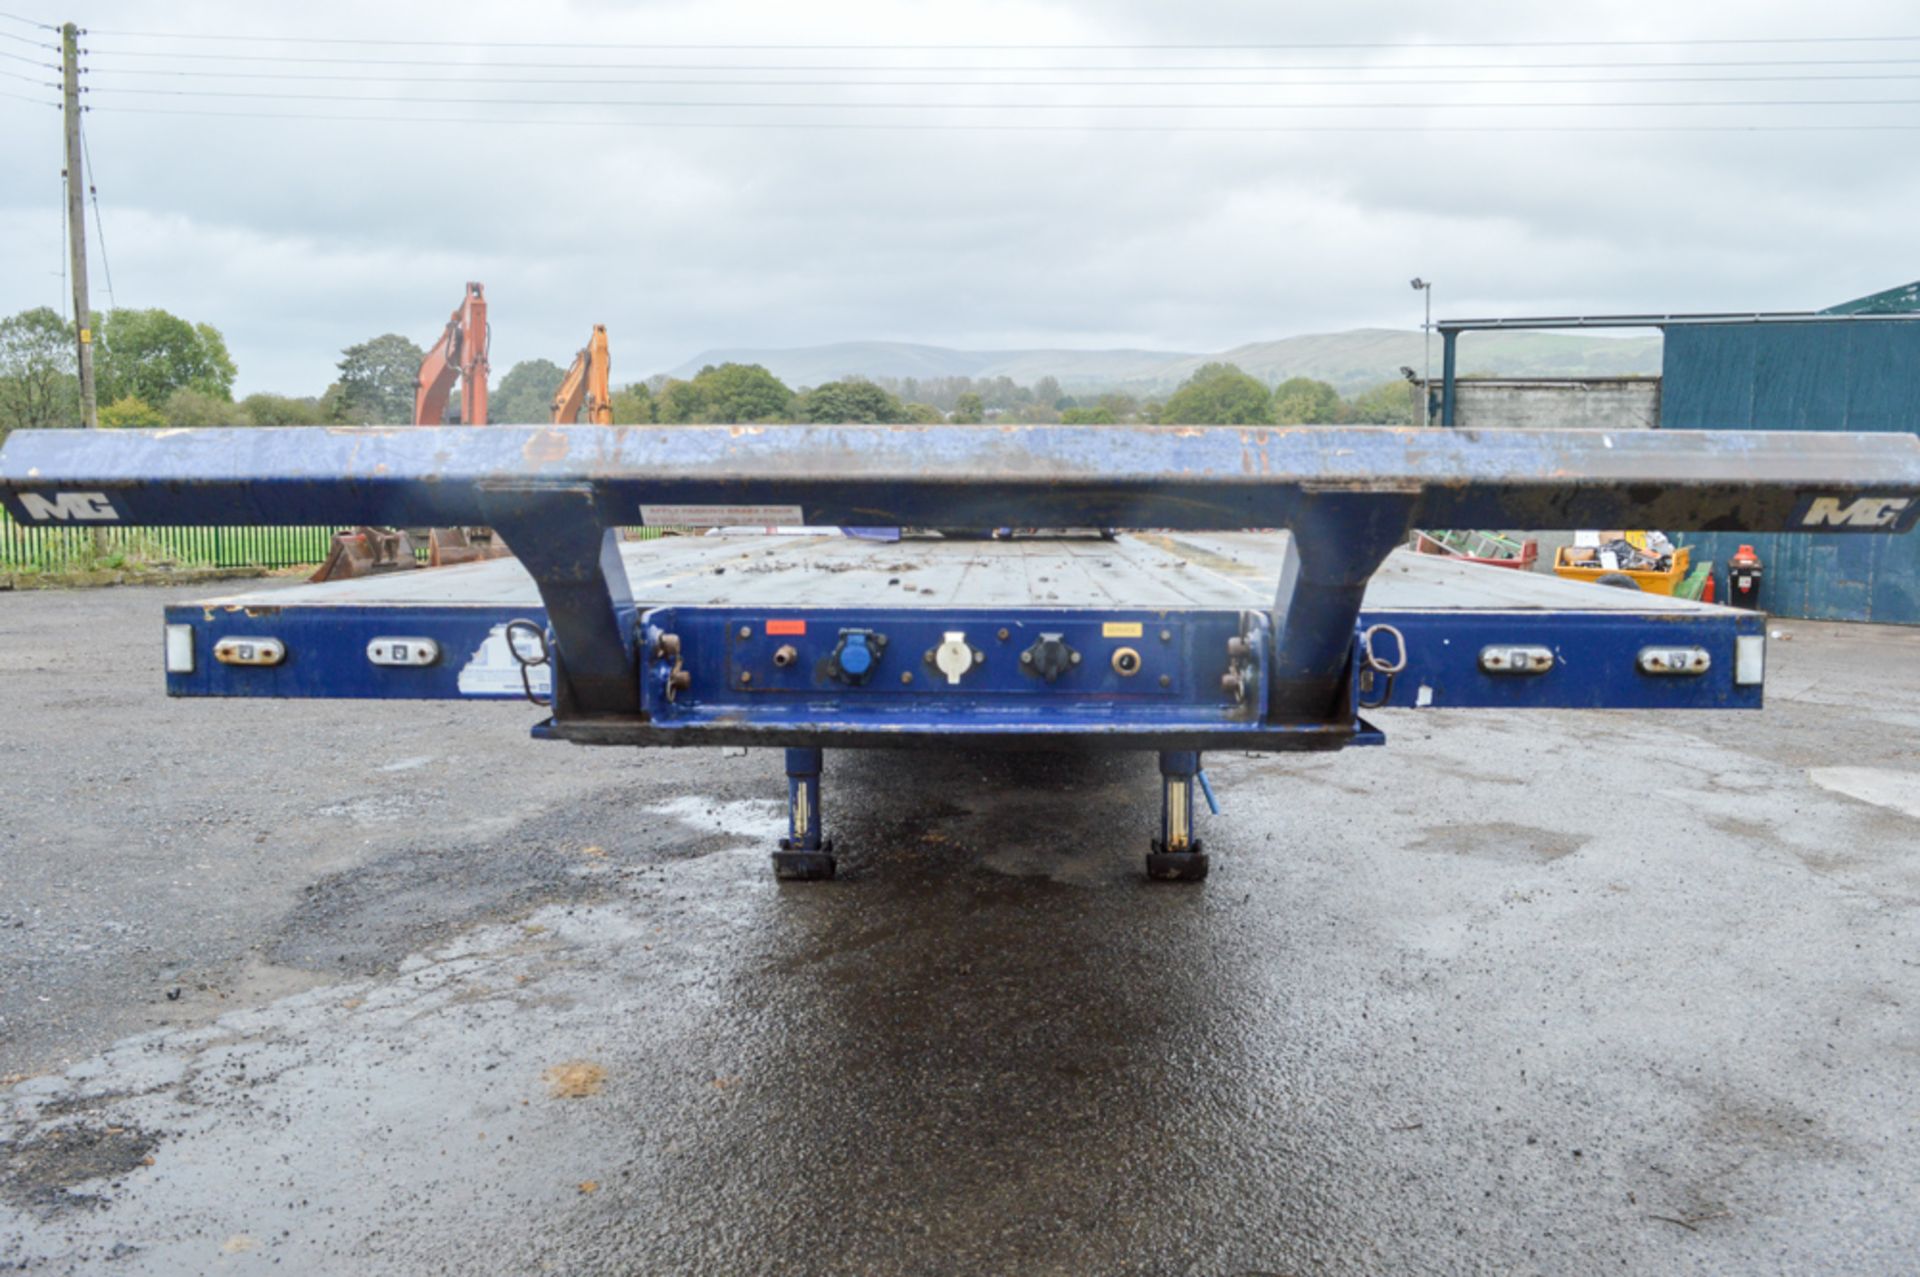 M&G SLC 27Y stepframe low loader trailer Year: 2010 MOT Expires: 30/06/2018 Chassis No: 36465 c/w - Image 11 of 12